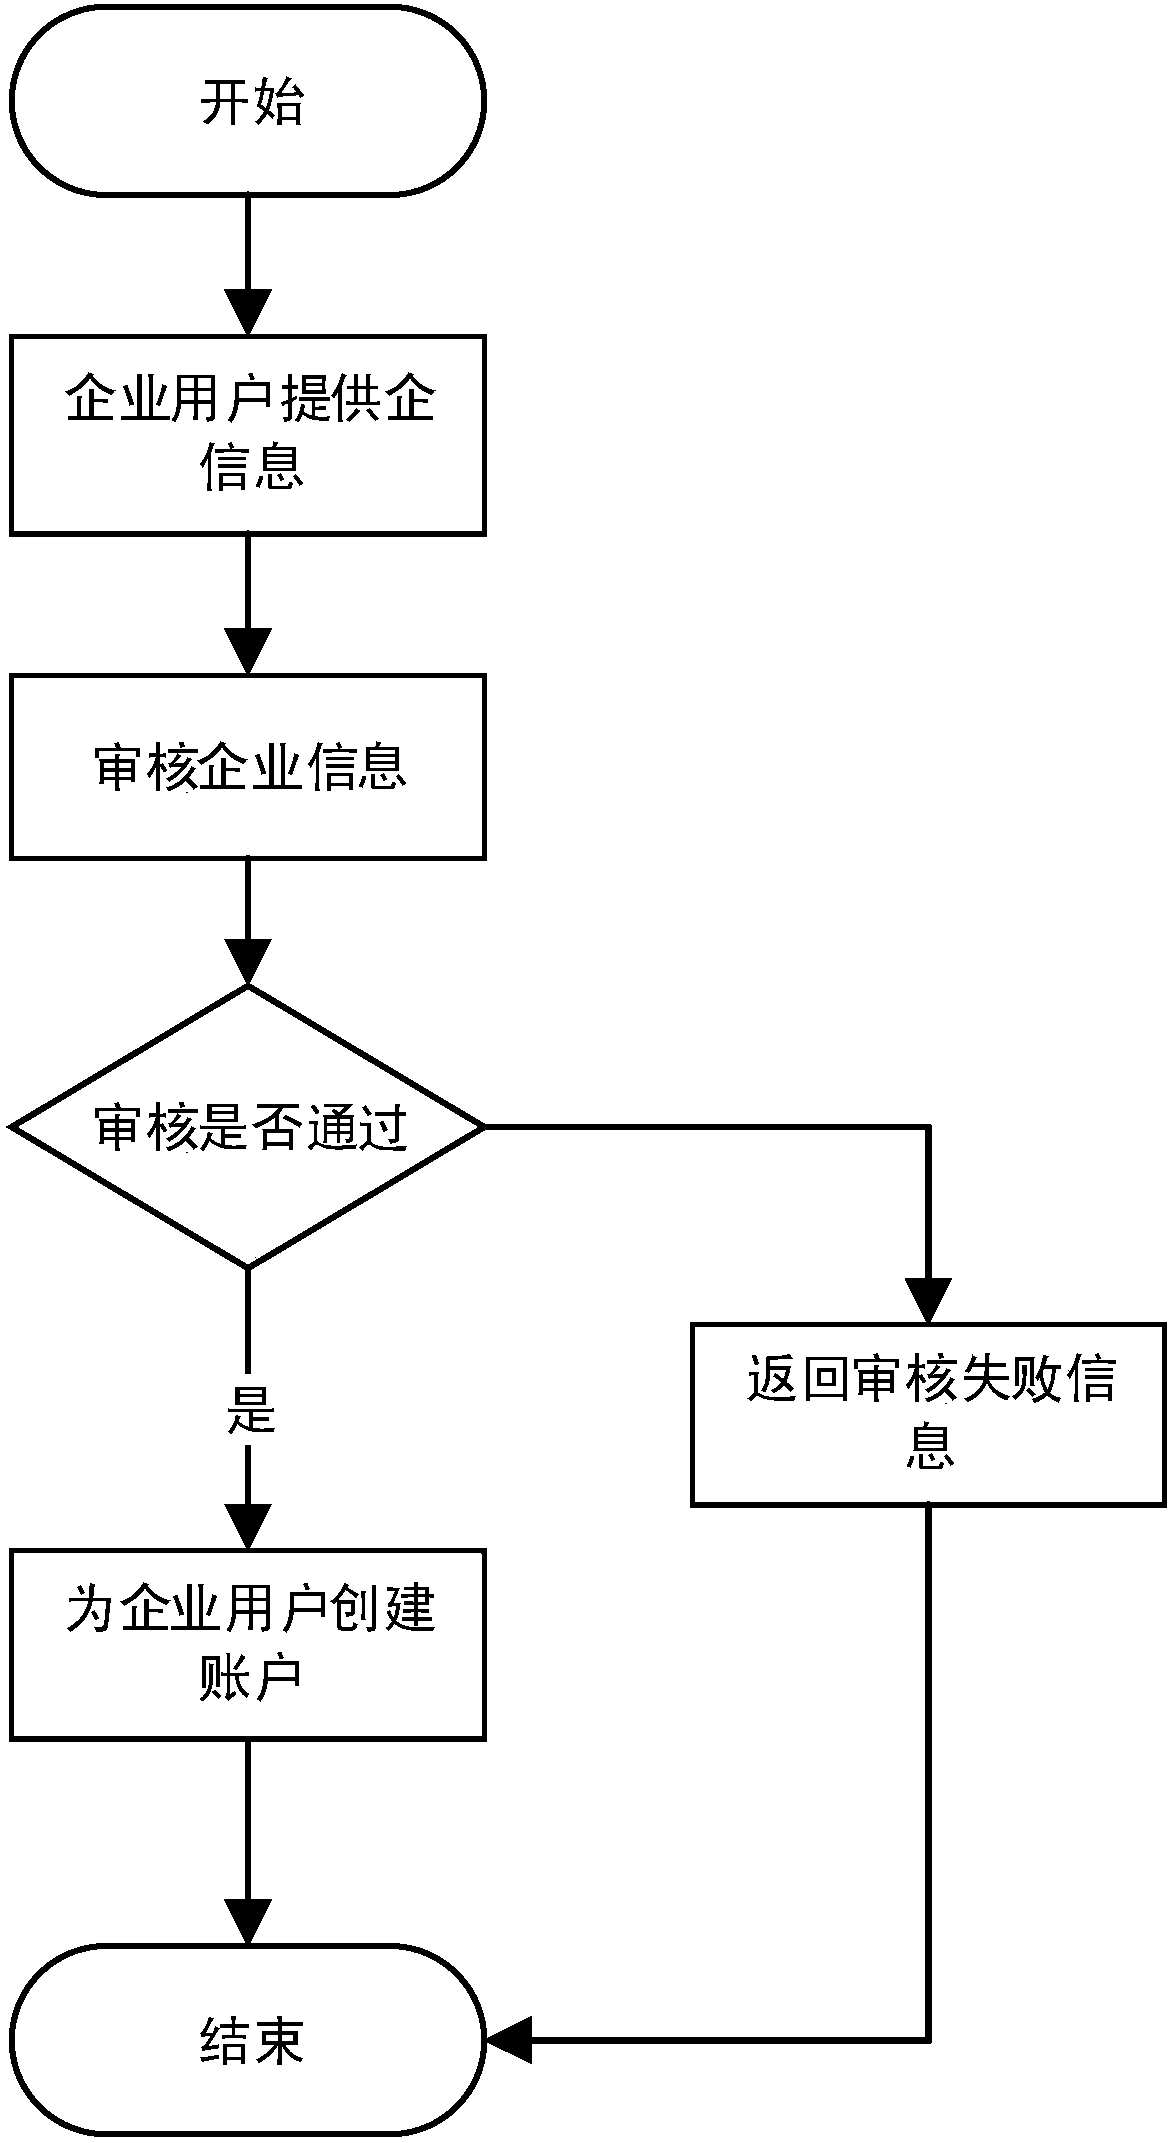 Personal credit information sharing system and method based on block chain